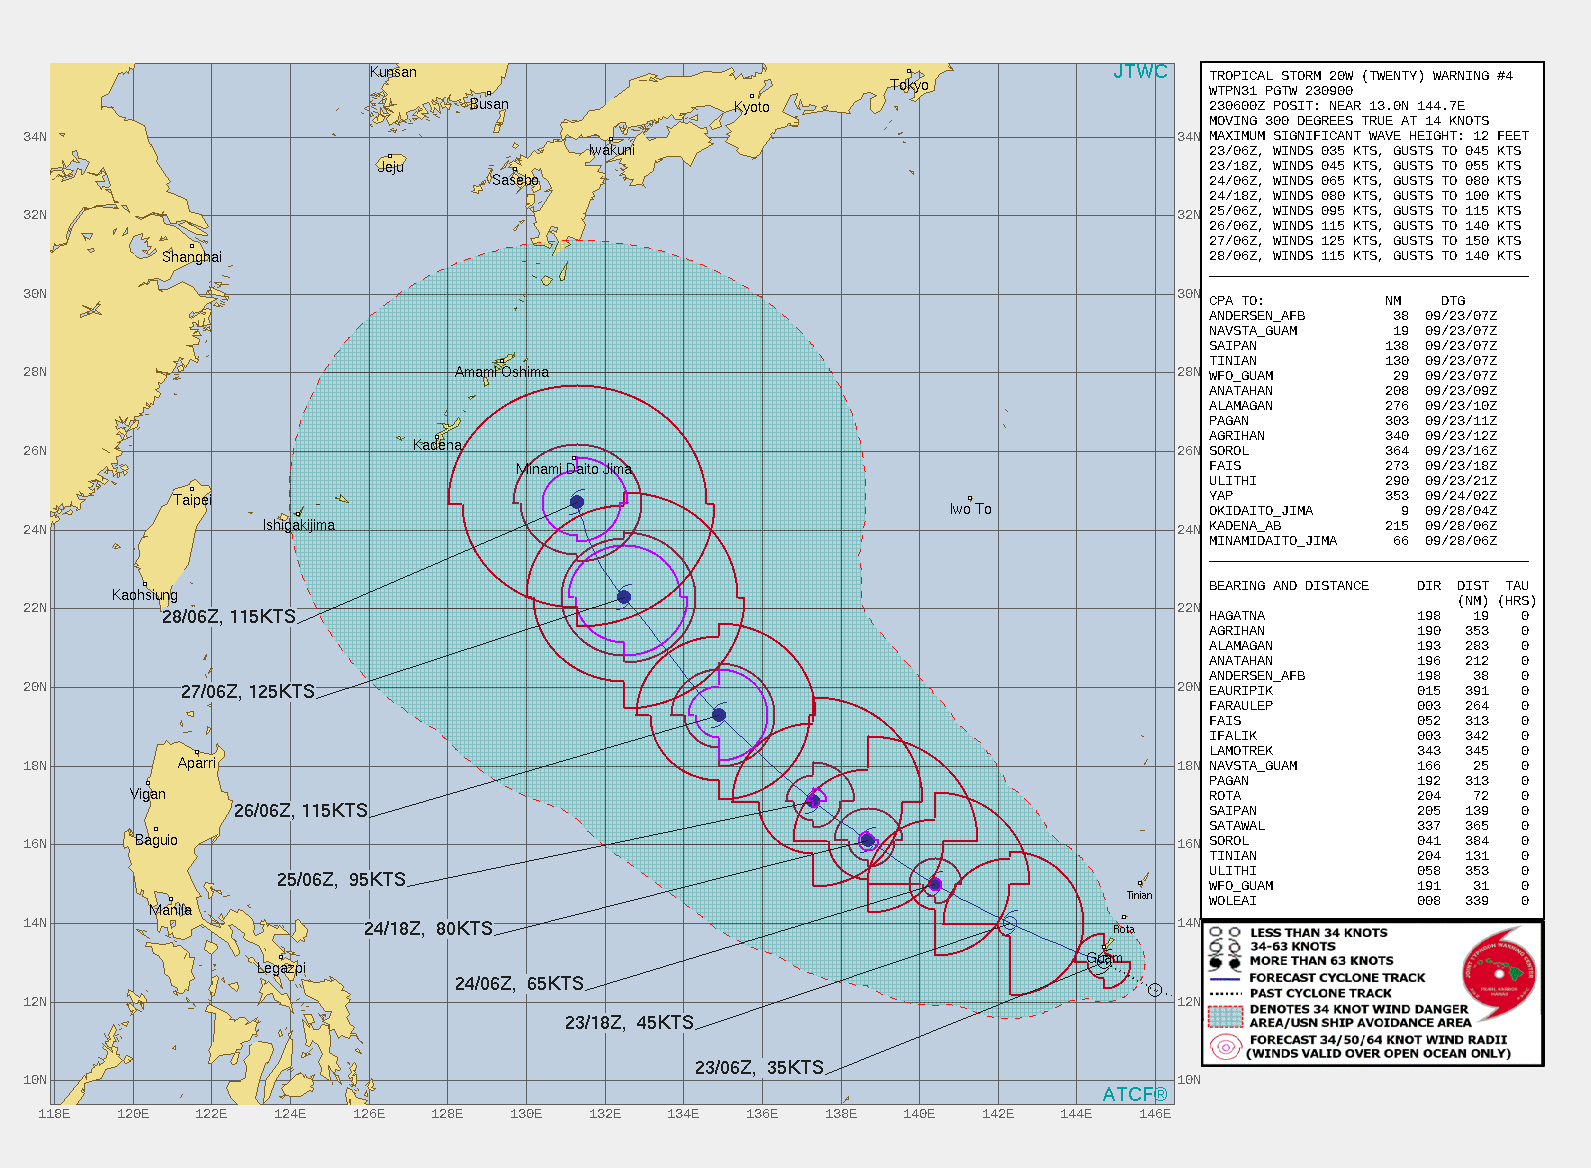 SIGNIFICANT FORECAST CHANGES: FORECAST TRACK HAS SHIFTED LEFT OF THE PREVIOUS FORECAST WITH AN INCREASED TRACK SPEED.  FORECAST DISCUSSION: TS 20W WILL CONTINUE NORTHWEST THROUGH AN INCREASINGLY FAVORABLE ENVIRONMENT OF WARM SEA SURFACE TEMPERATURES (30-31 DEGREE CELSIUS), LOW SHEAR AND STRONG UPPER LEVEL OUTFLOW. THE HIGHLY FAVORABLE ENVIRONMENT WILL FUEL SUSTAINED INTENSIFICATION TO 125 KNOTS/CAT 4 BY 96H. AFTERWARDS, TS 20W WILL BE SLIGHTLY HAMPERED BY INCREASING VERTICAL WIND SHEAR. AROUND  120H, TS 20W WILL REACH THE SUBTROPICAL RIDGE AXIS BEFORE BEGINNING A GRADUAL RECURVE SOUTHWEST OF JAPAN.